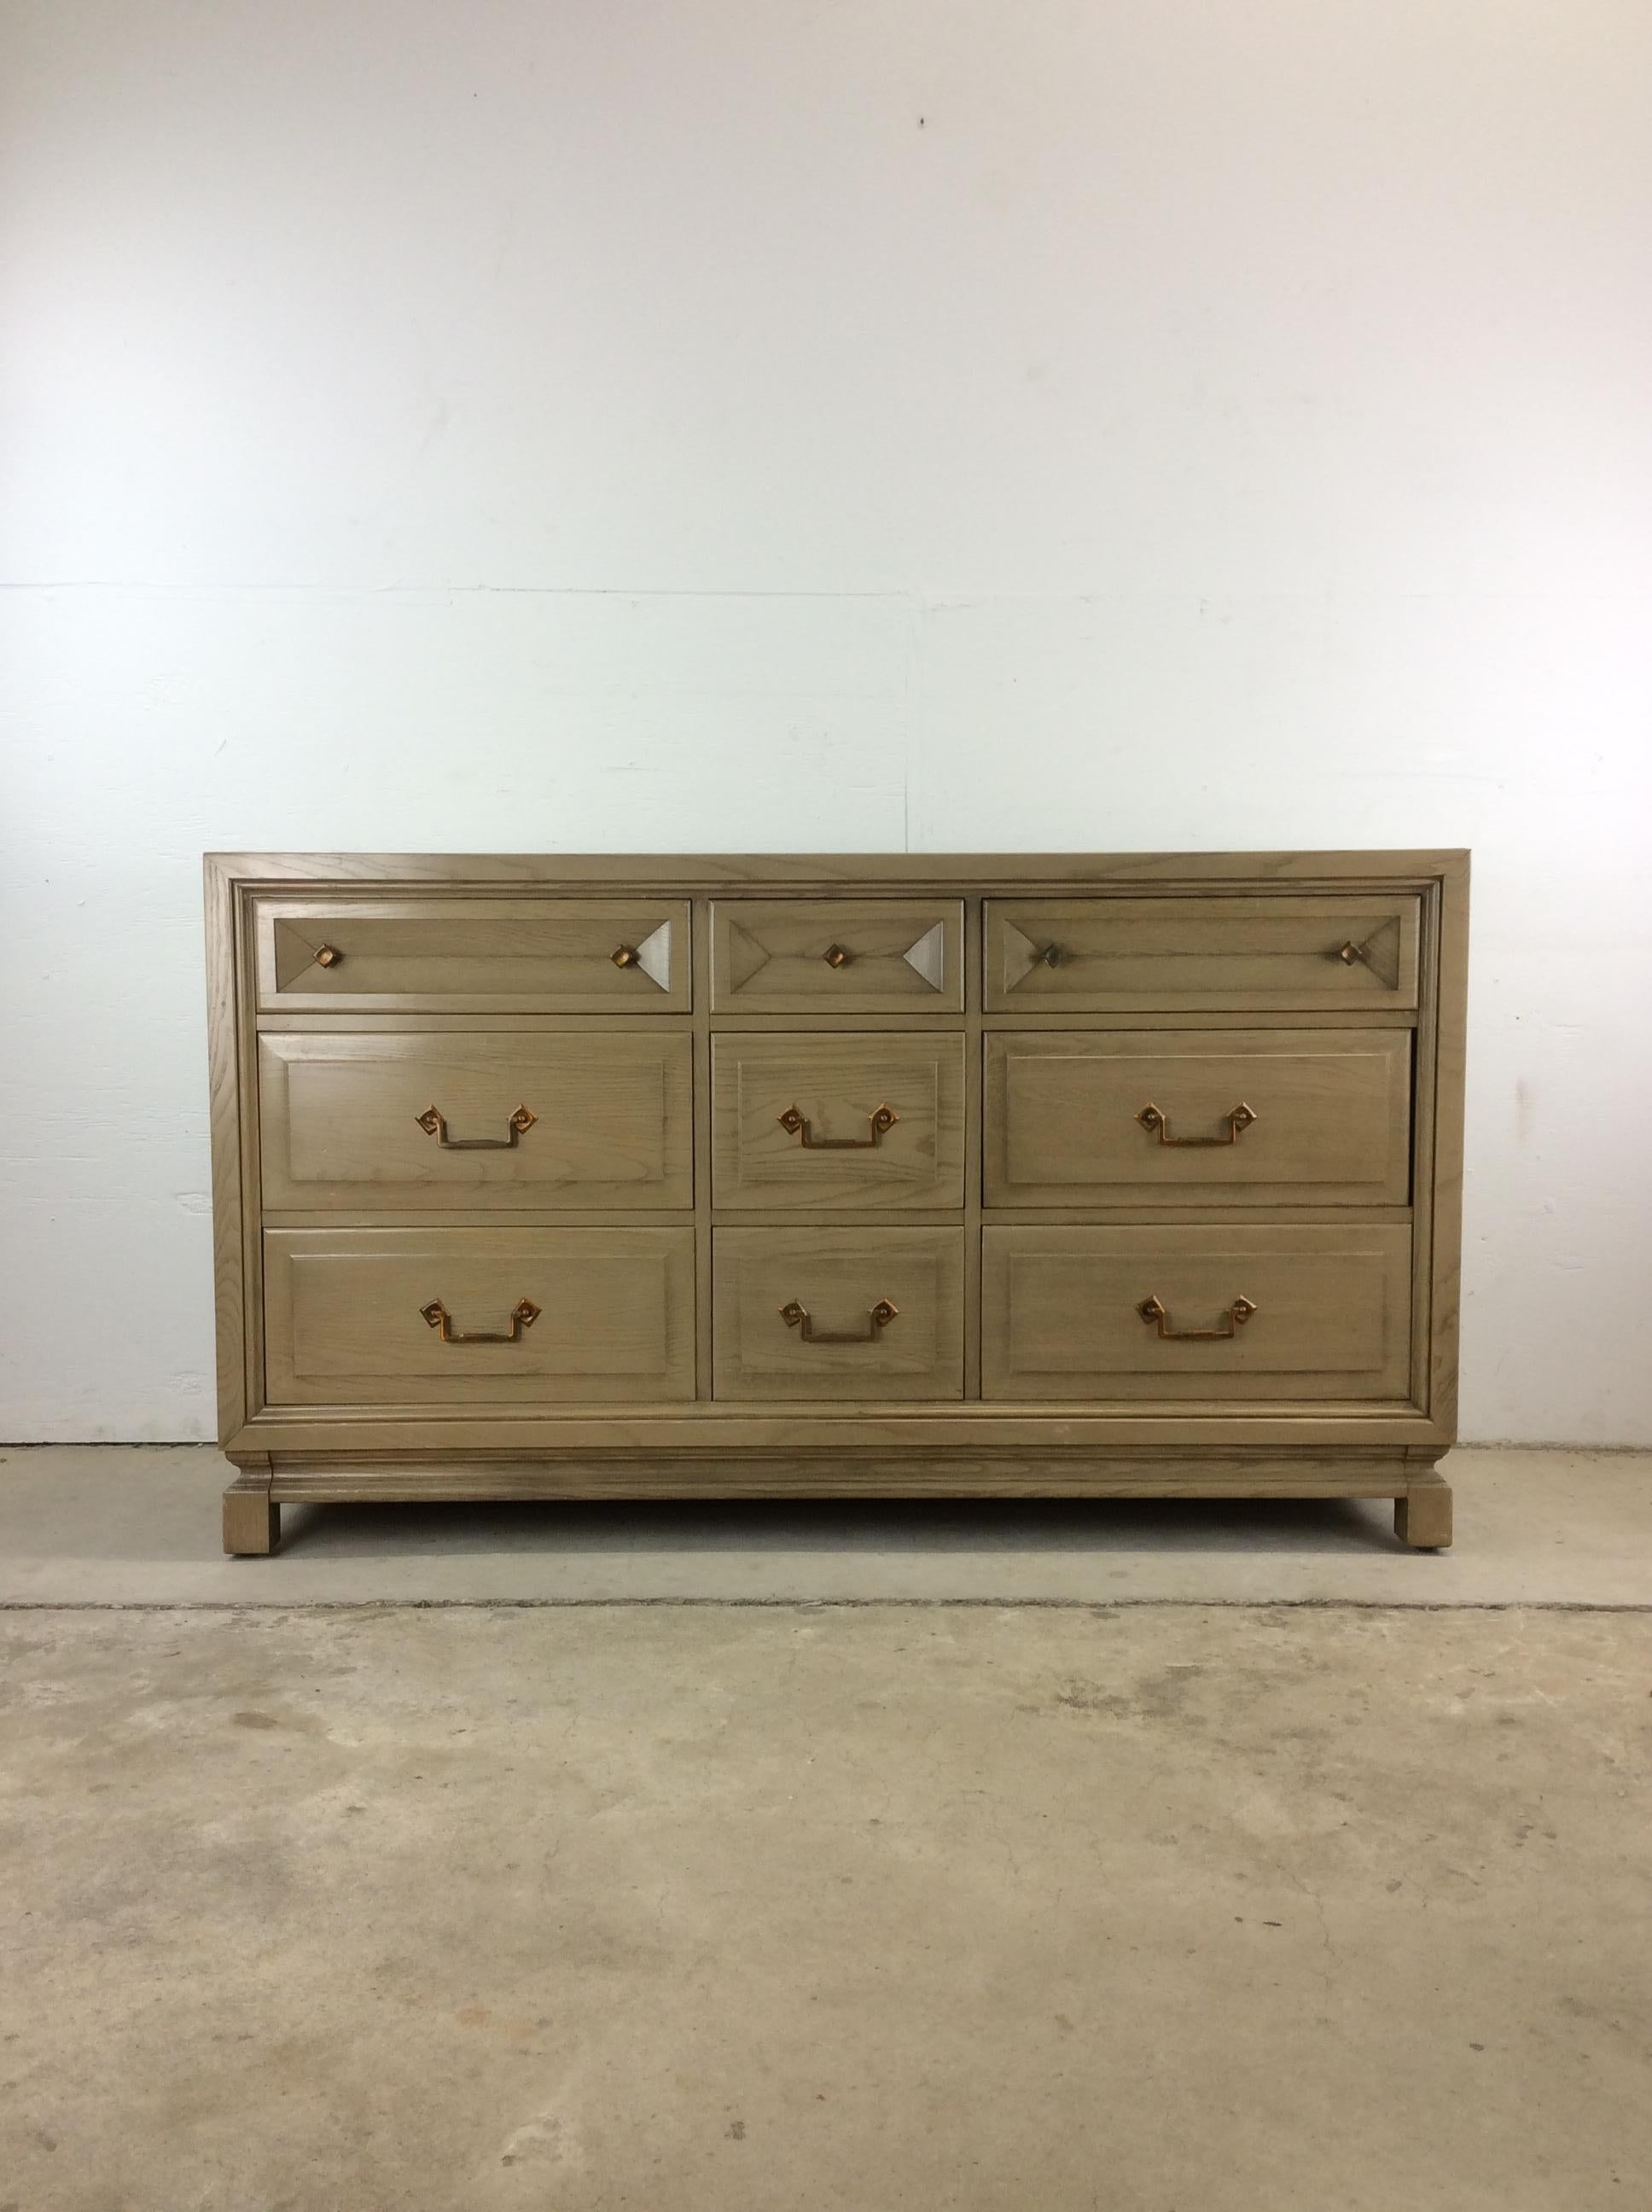 This mid century modern lowboy dresser features hardwood construction, oak veneer with original limed oak finish, nine dovetailed drawers with copper accented hardware, and stretcher base.  Matching pair of nightstands, writing desk, and highboy